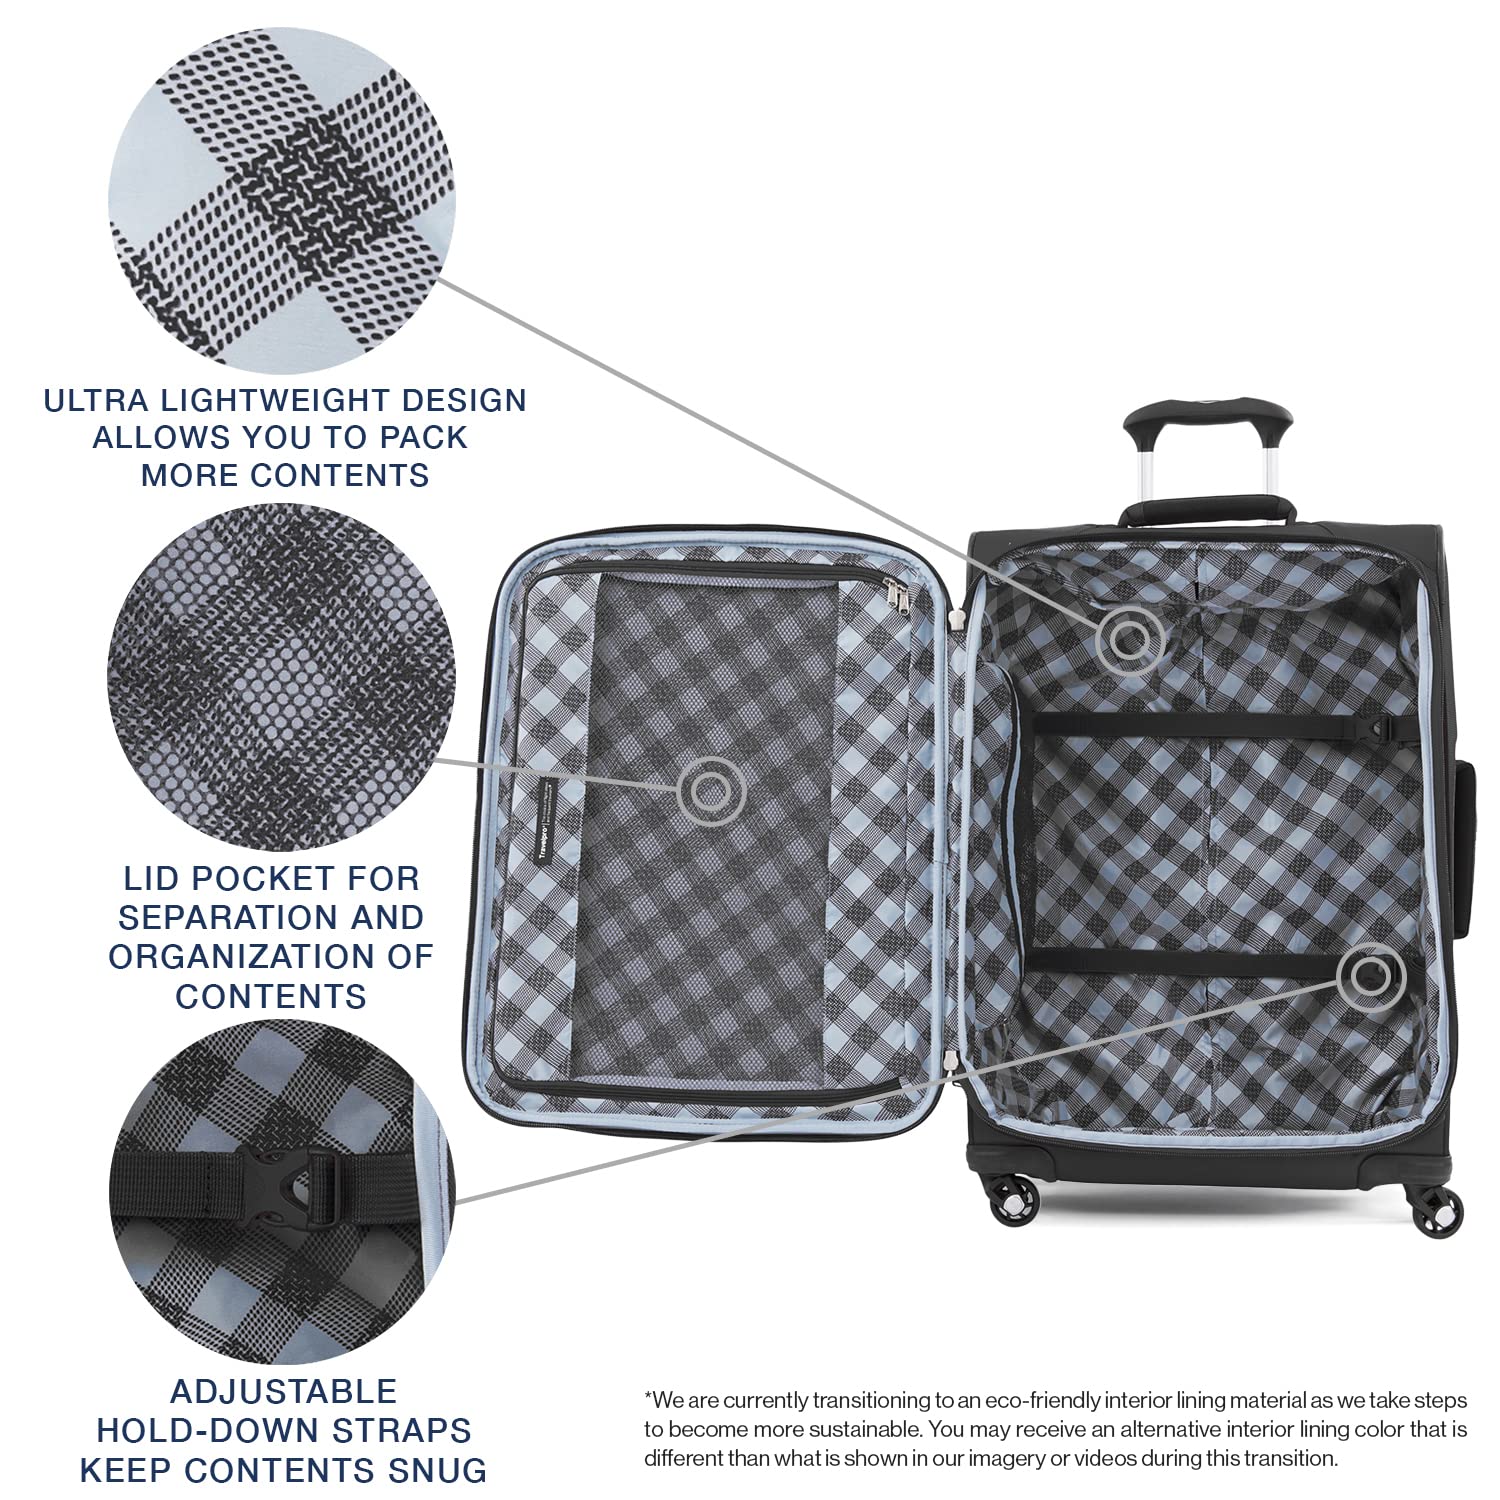 Travelpro Maxlite 5 Softside Expandable Luggage with 4 Spinner Wheels, Lightweight Suitcase, Men and Women U17